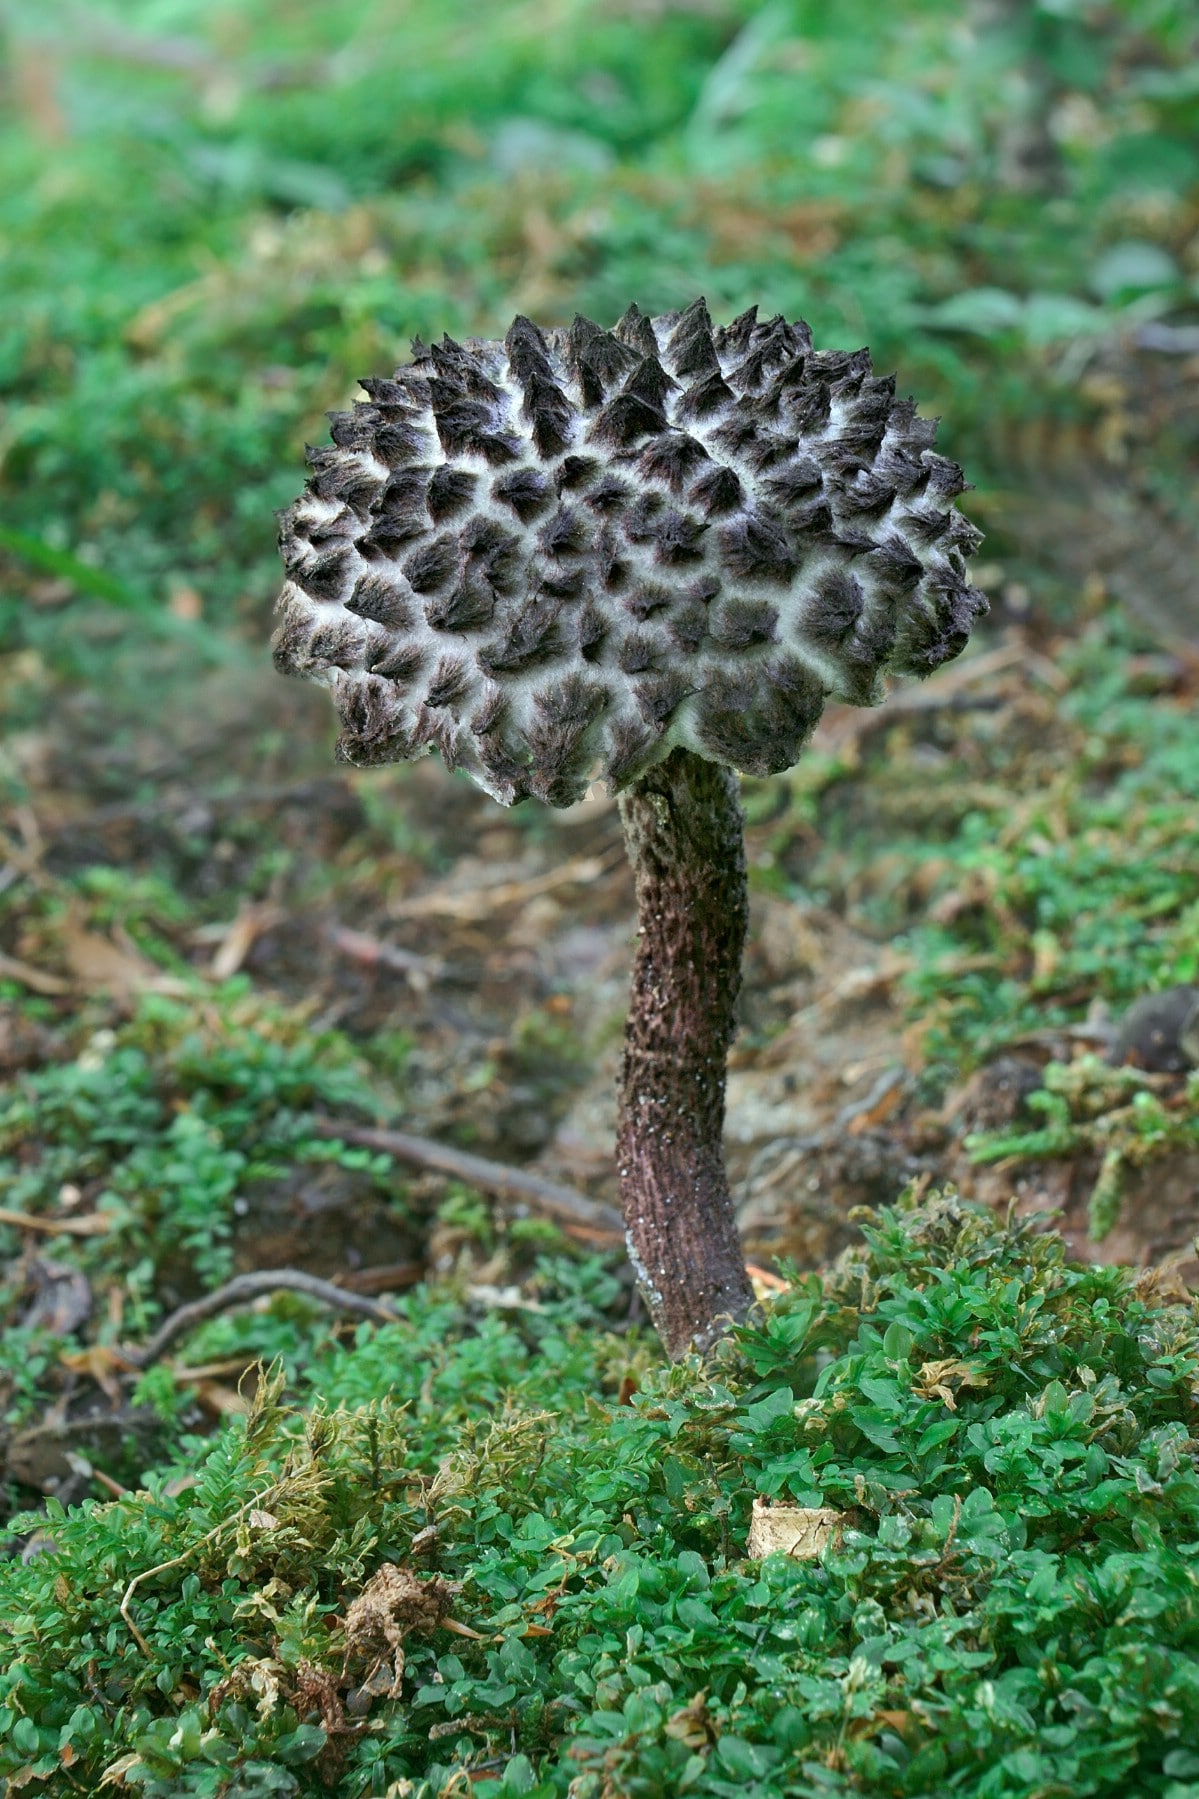 Mature old man of the woods on forest floor.